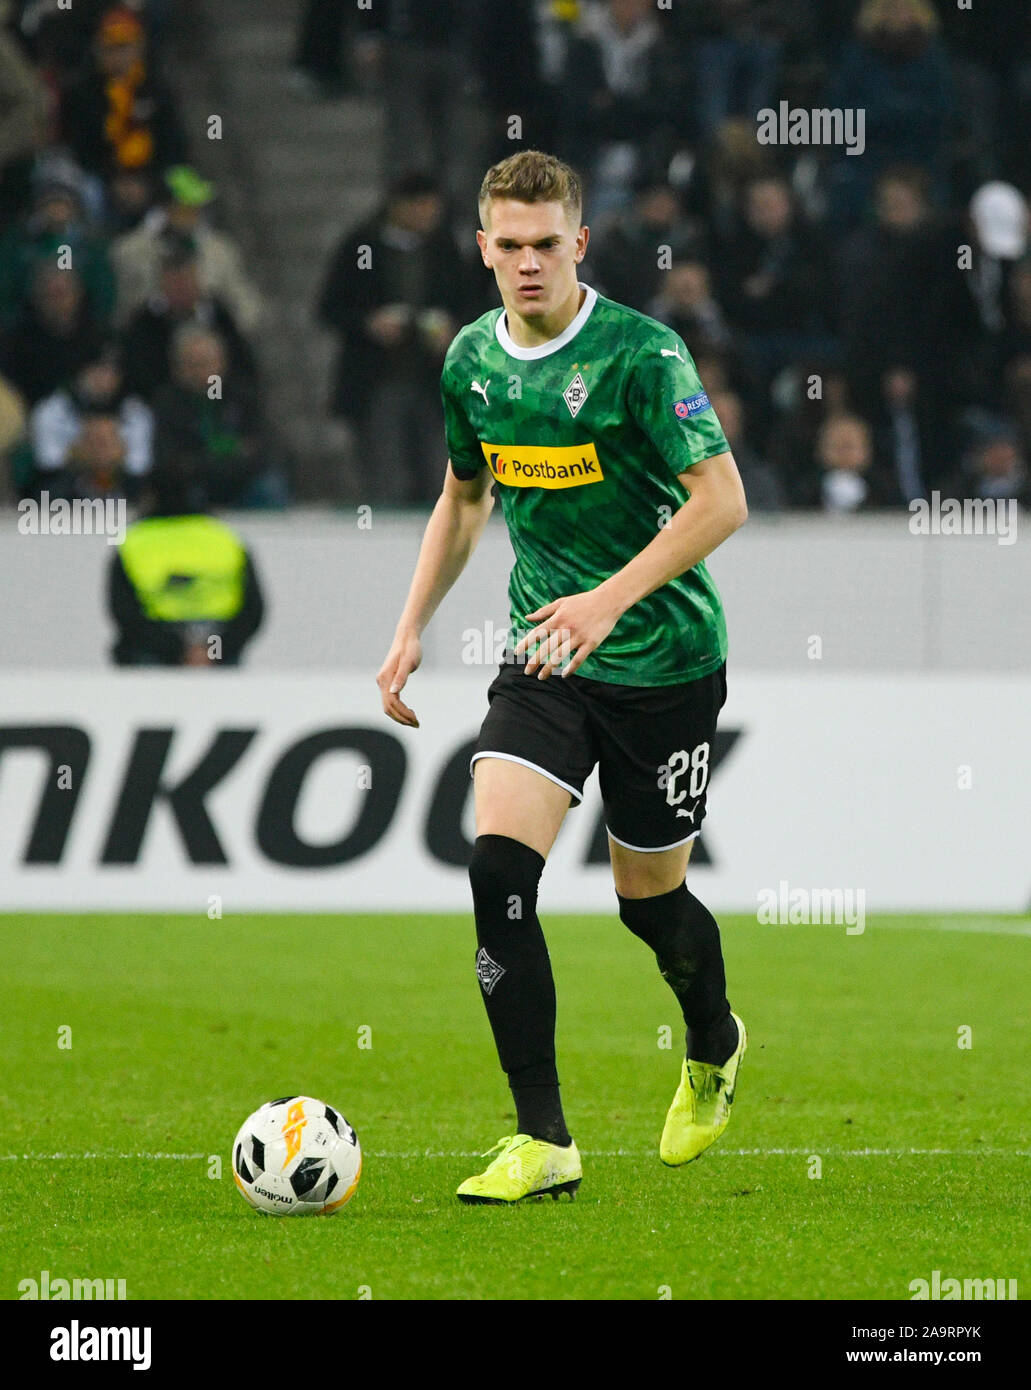 Borussia Park Monchengladbach, 7.11.2019,  Football: Europe League  Season 2019/20, matchday 4, Borussia Monchengladbach (MGL) vs. AS Rom (ROM):  Matthias Ginter (MGL);   UEFA REGULATIONS PROHIBIT ANY USE OF PHOTOGRAPHS AS IMAGE SEQUENCES AND/OR QUASI-VIDEO Stock Photo